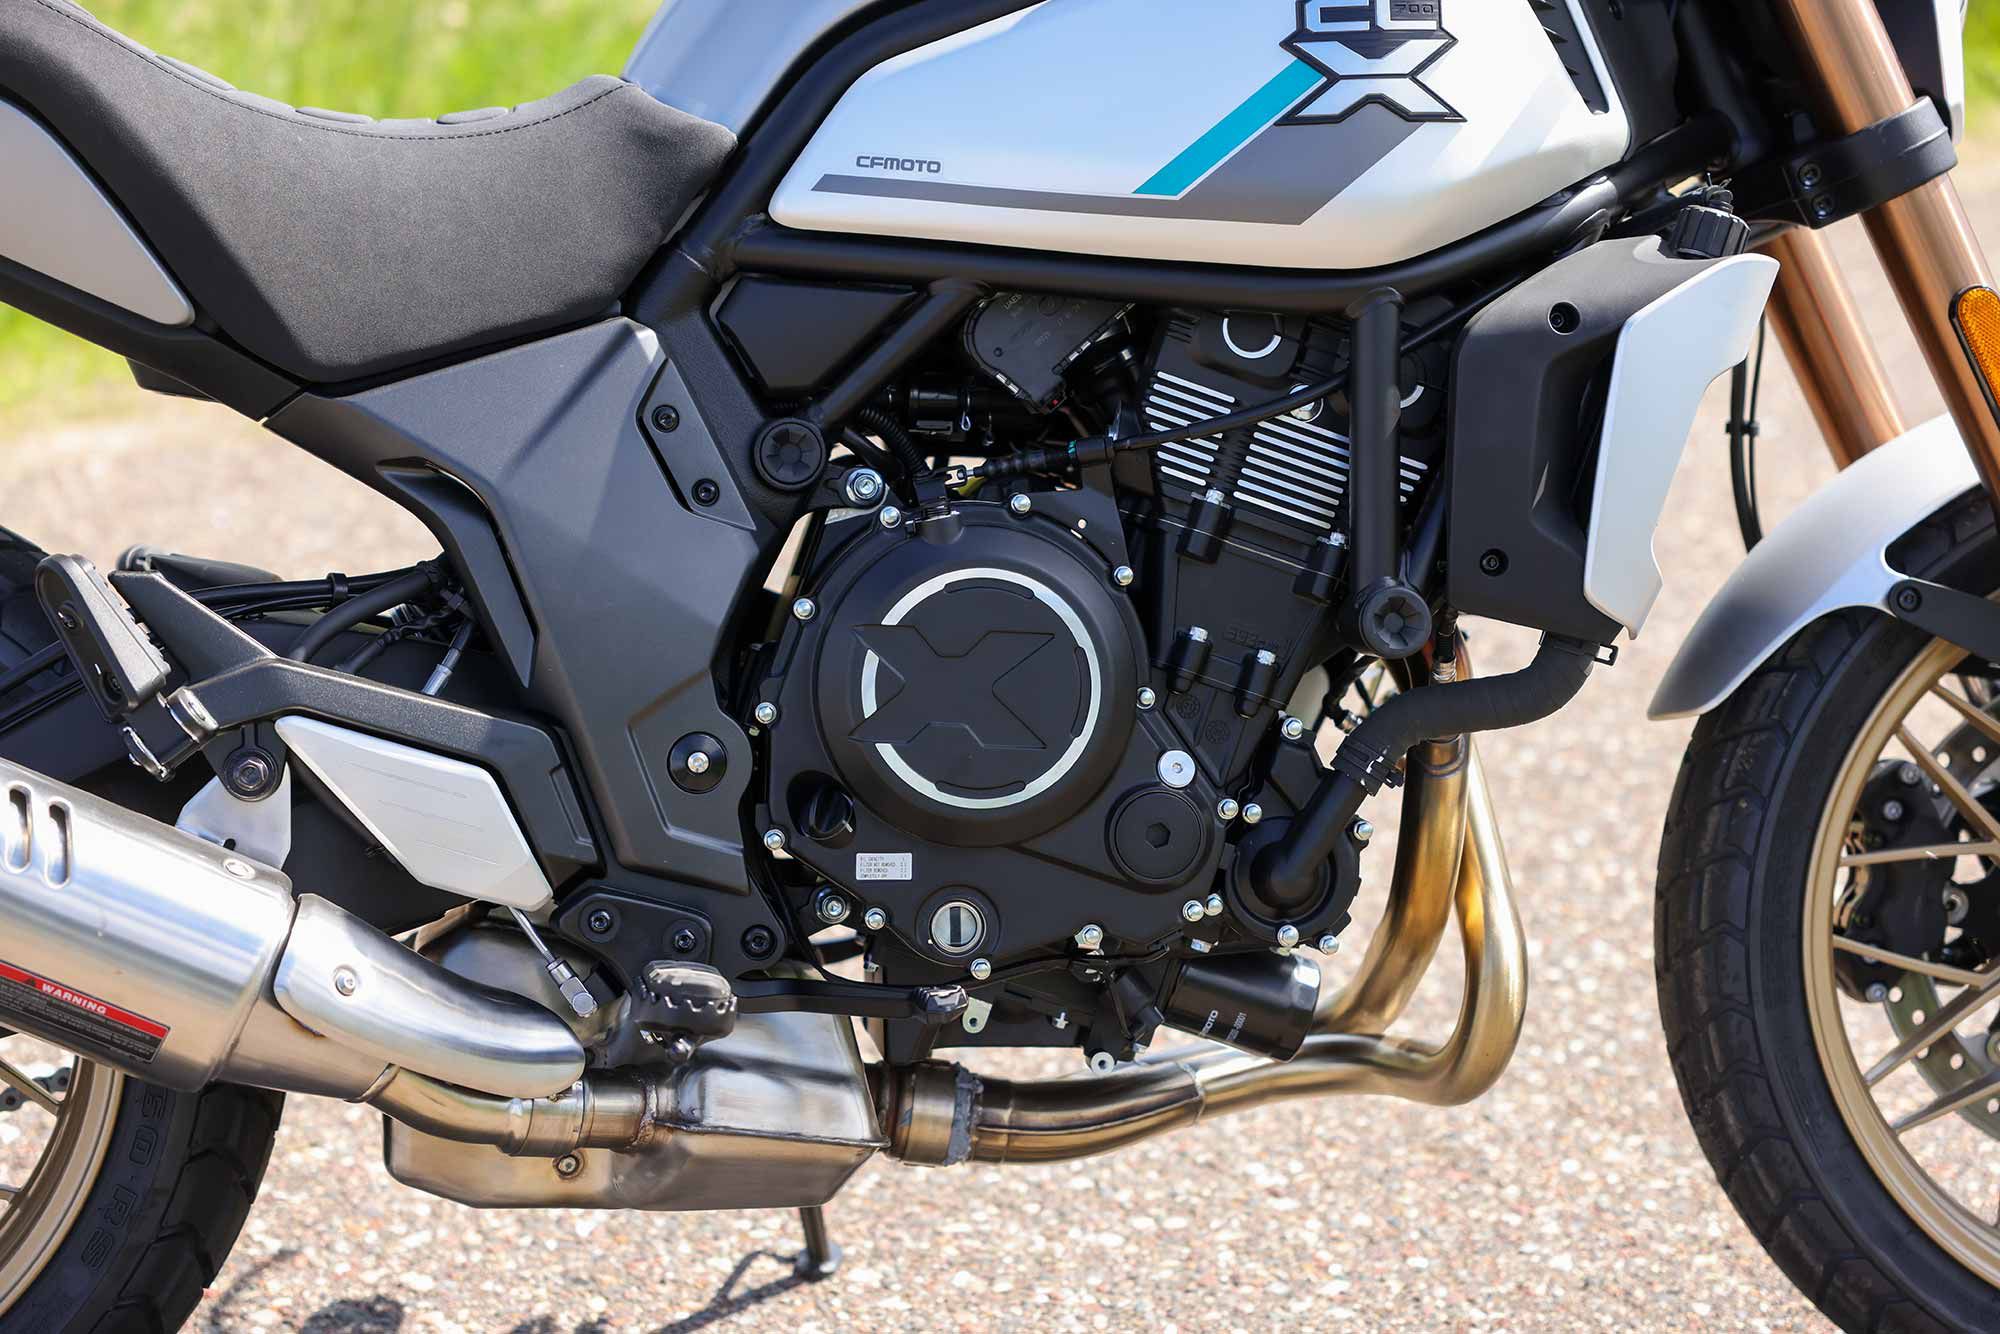 The 700CL-X and CL-X Sport feature the same powerplant, a 693cc liquid-cooled DOHC parallel twin producing a claimed 74 hp and 47.9 lb.-ft. of torque.